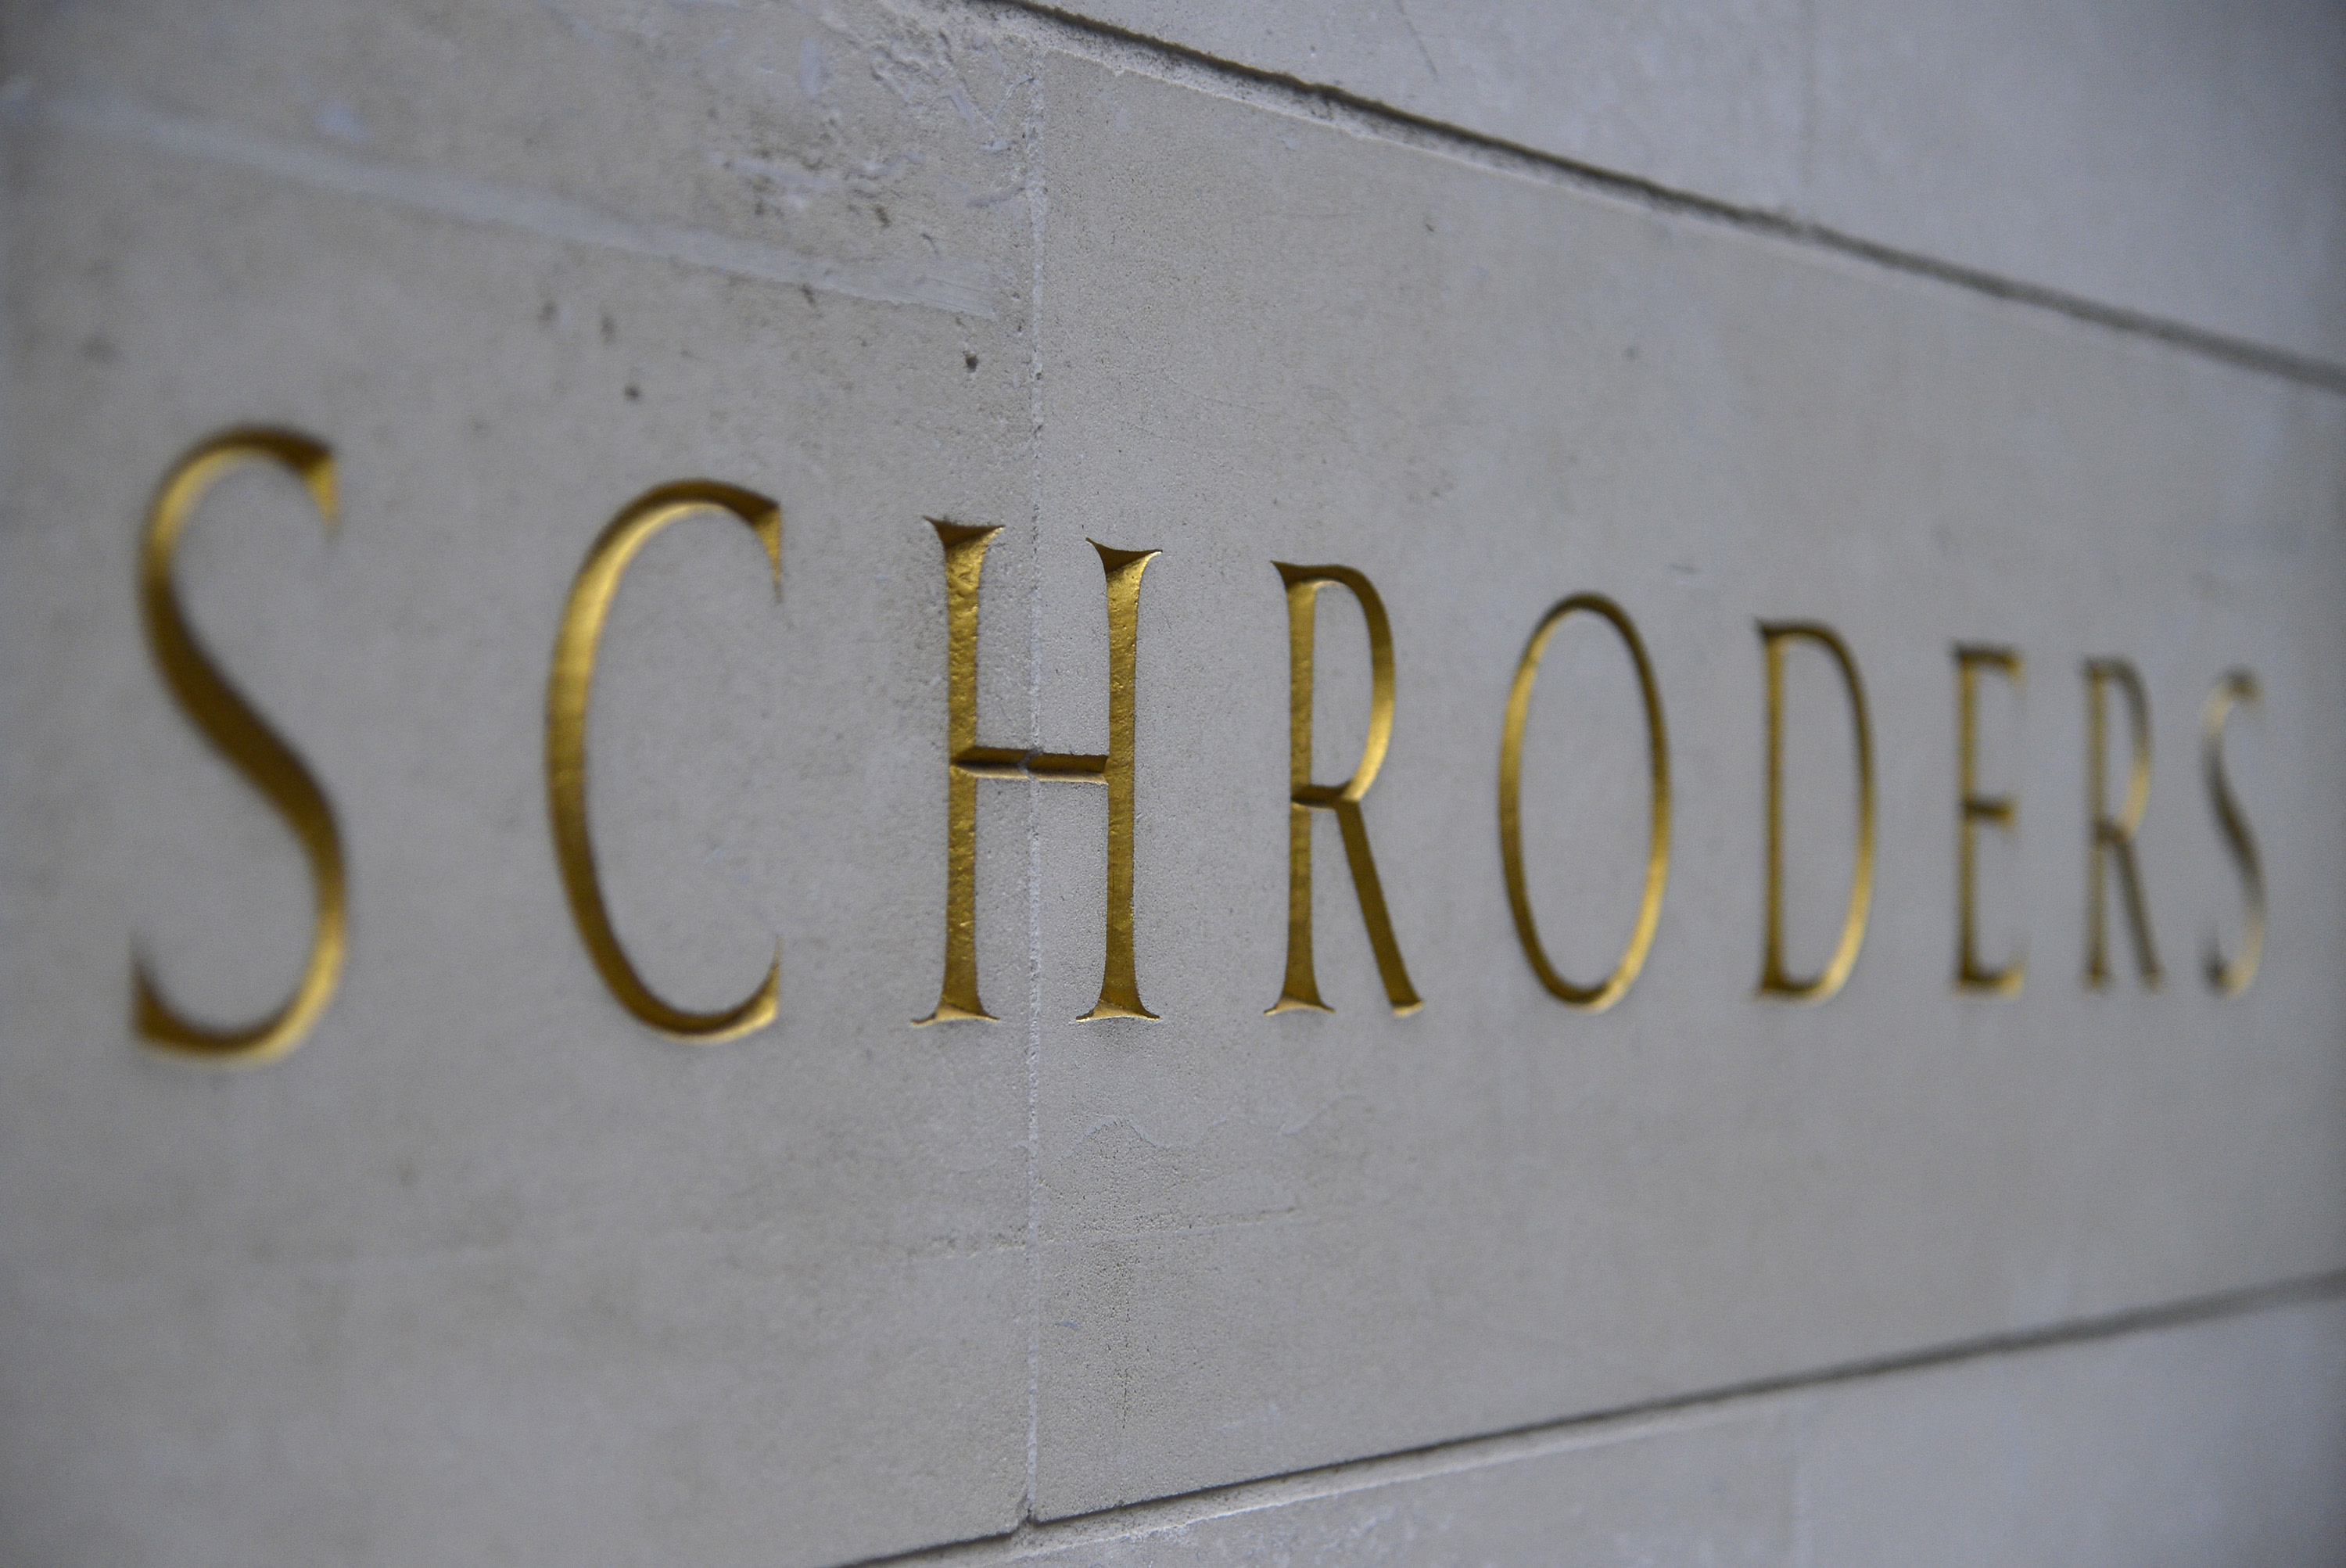 Schroders Pushes Oil & Gas Giants ExxonMobil, Chevron, and Shell to Remain Consistent with Paris Agreement